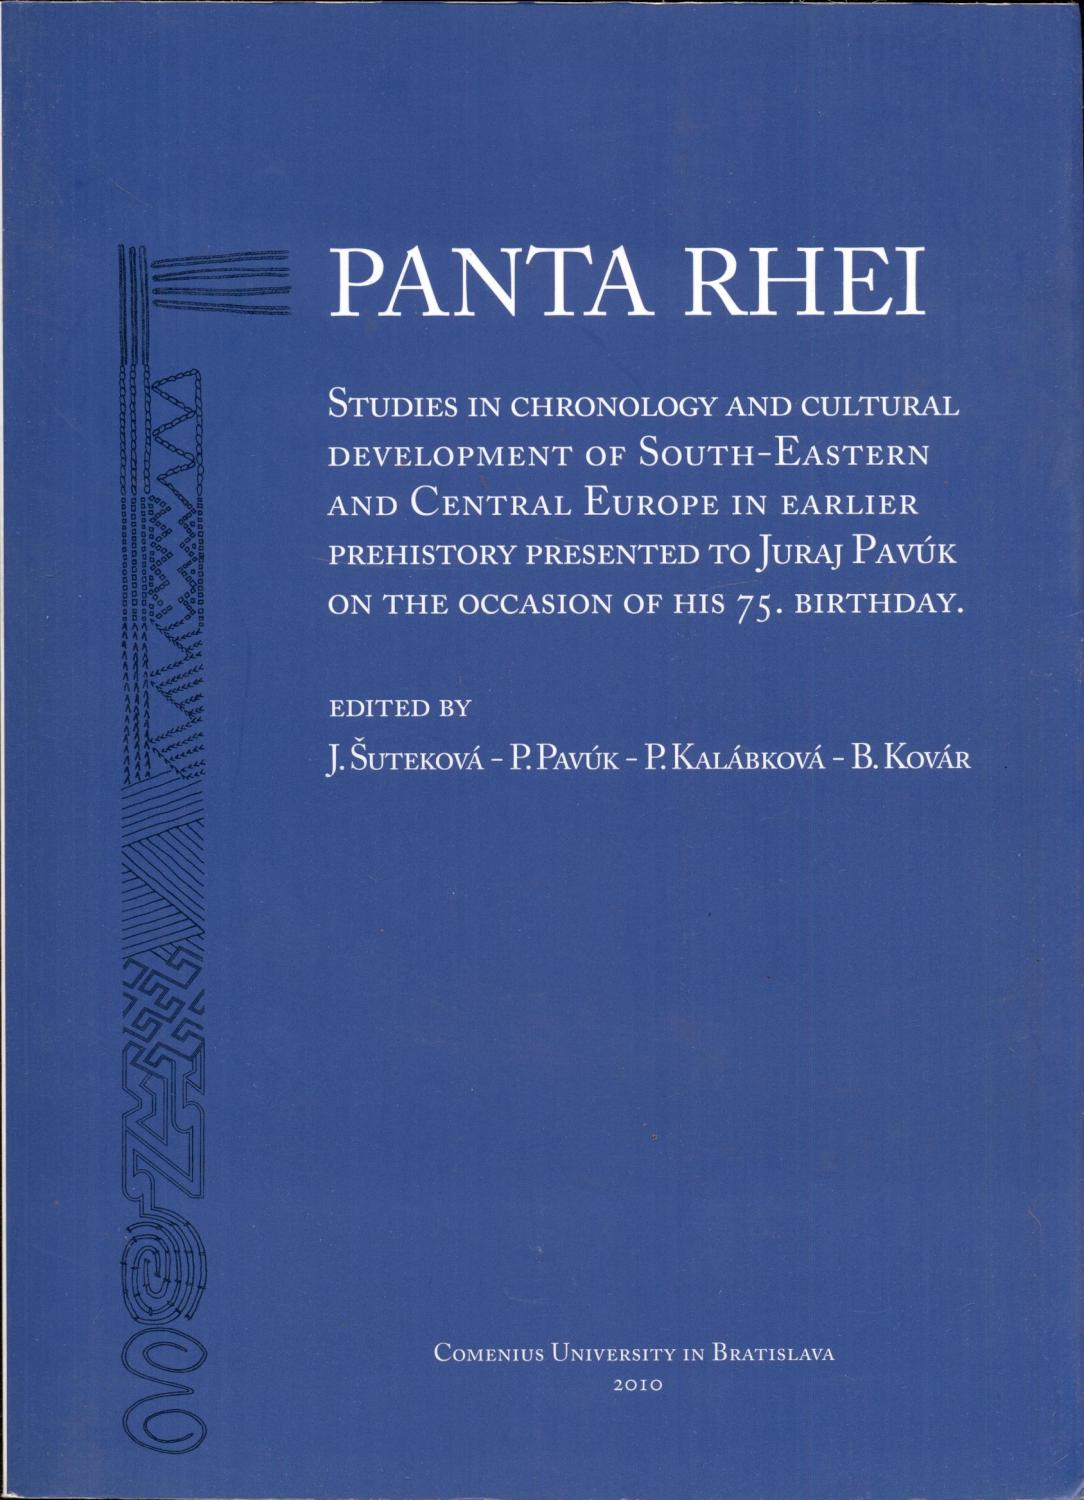 Panta rhei: Studies in chronology and cultural development of South-Eastern and Central Europe to Juraj Pavuk on the occassion of his 75th birthday [= Studia Archaeologica et Mediaevalia, Tomus XI] - Sutekova, J. et al. (eds.)